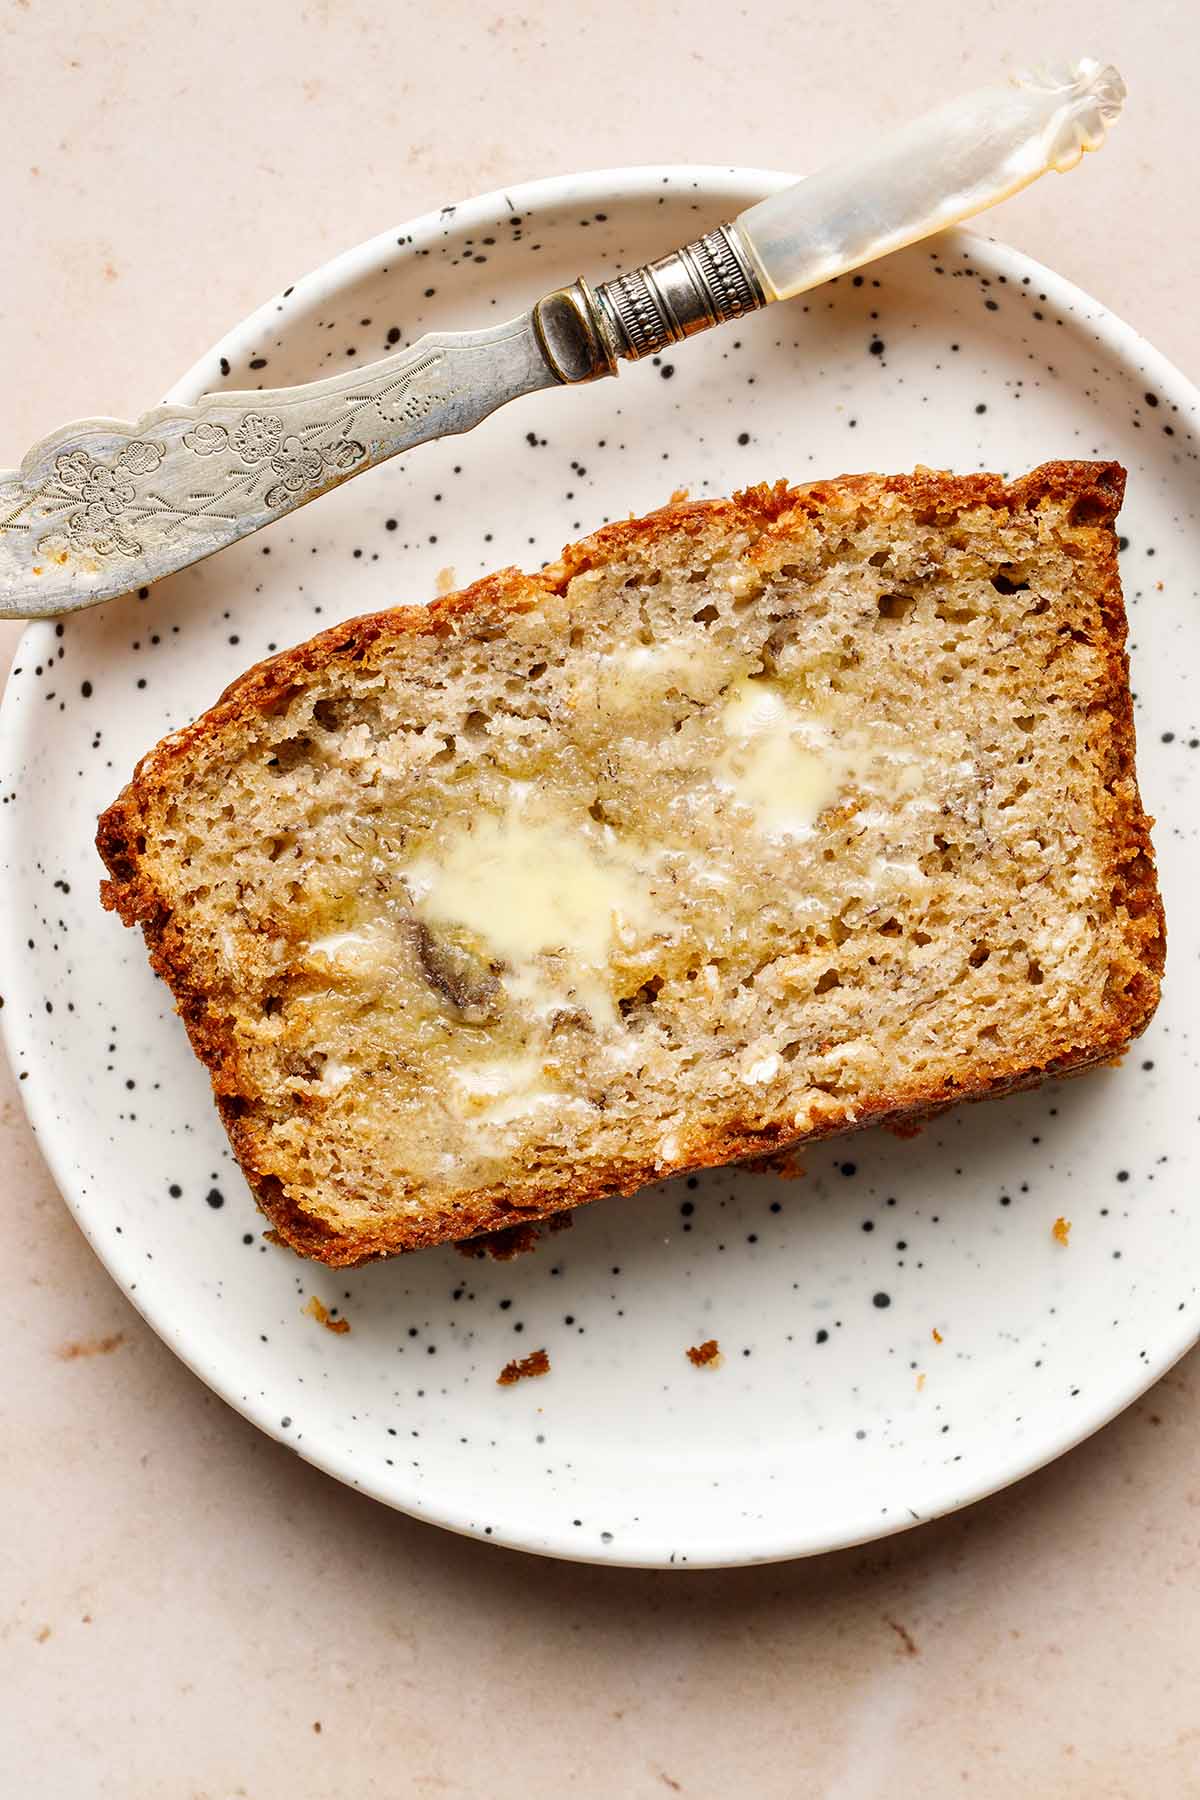 A slice of buttered sourdough banana bread on a small white speckled plate.